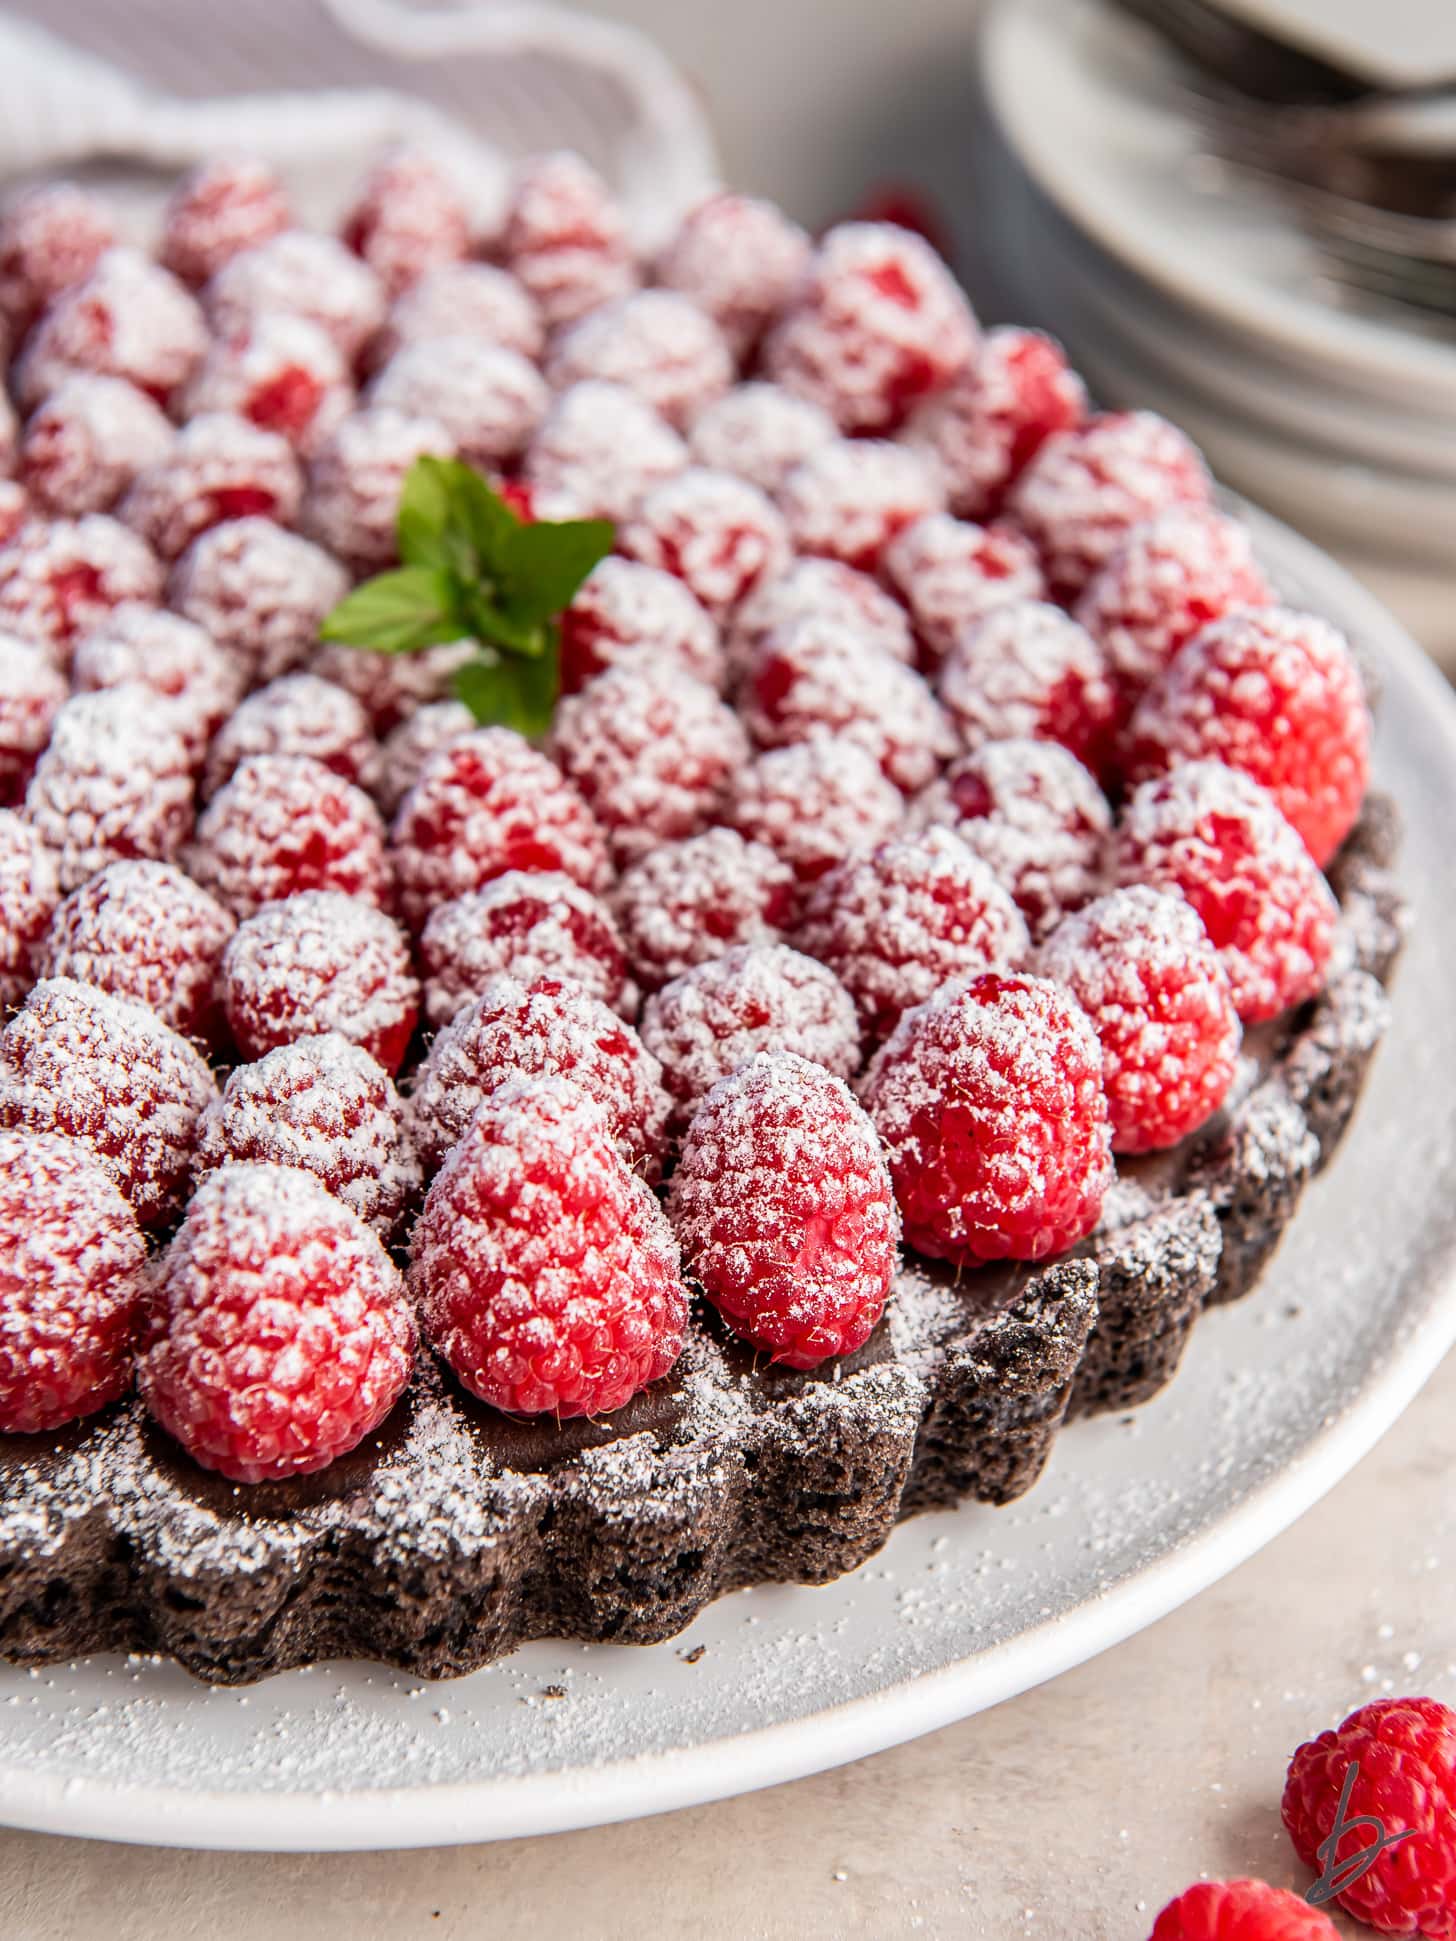 chocolate raspberry tart on a plate with confectioners' sugar dusted on top of the raspberries.